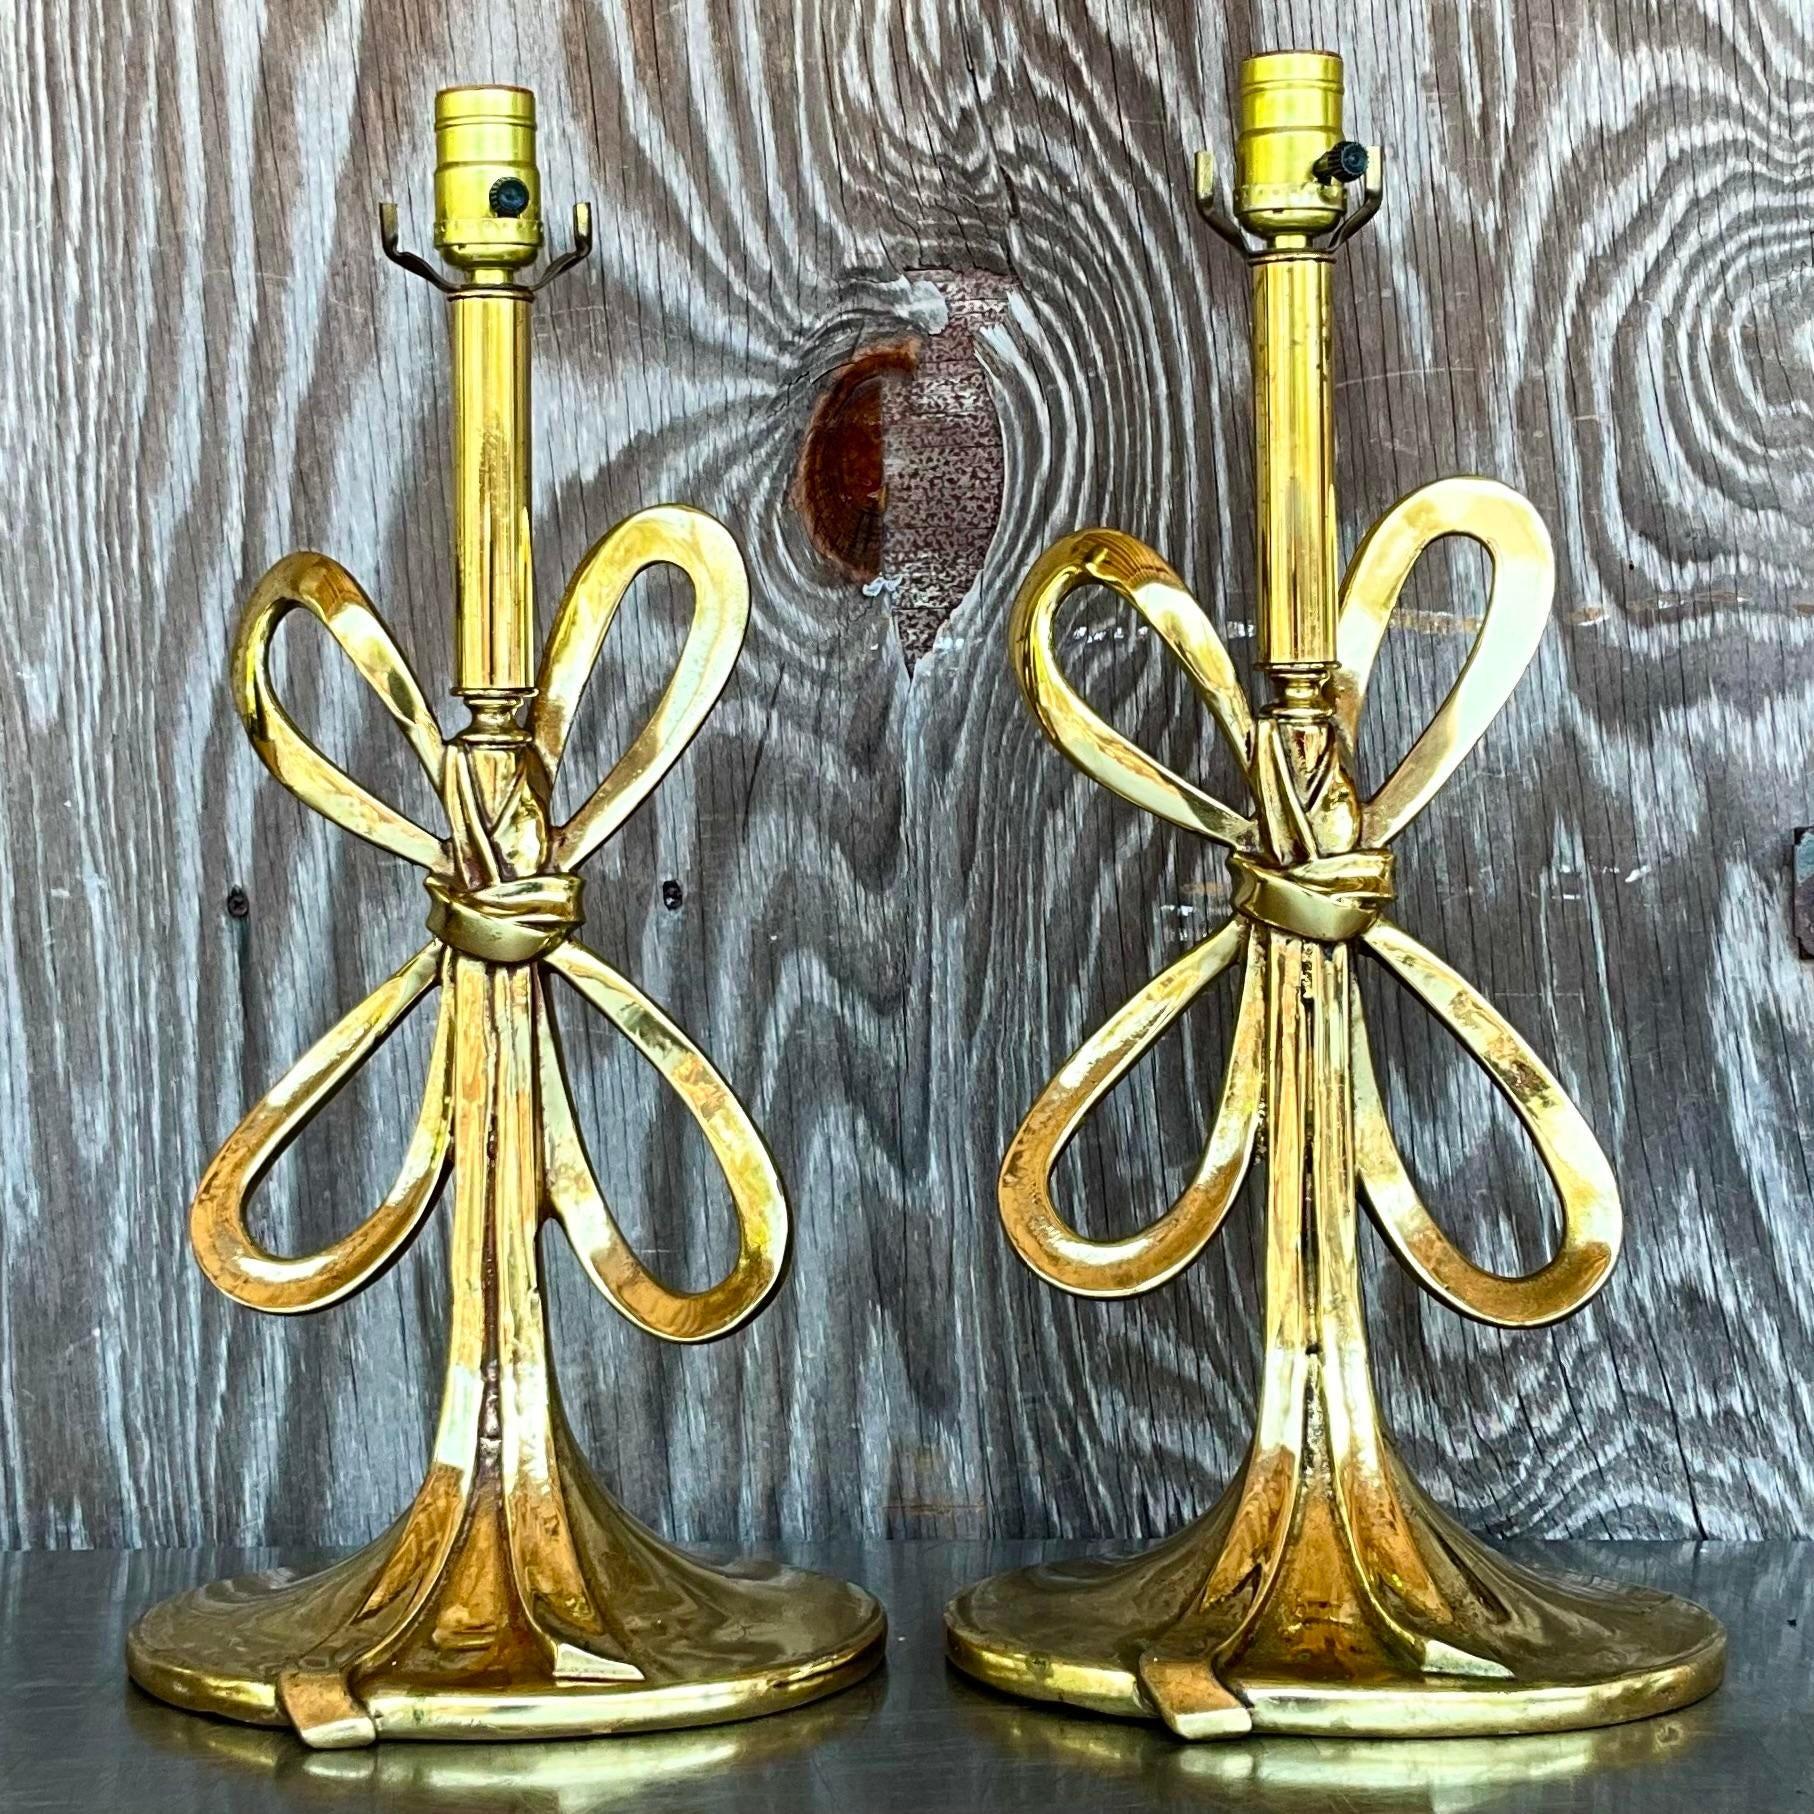 Illuminate your space with our Vintage Italian Regency Polished Brass Bow Lamps. Sold as a pair, these American-curated treasures feature elegant Regency design with polished brass bows, adding a touch of Italian luxury and timeless charm to any